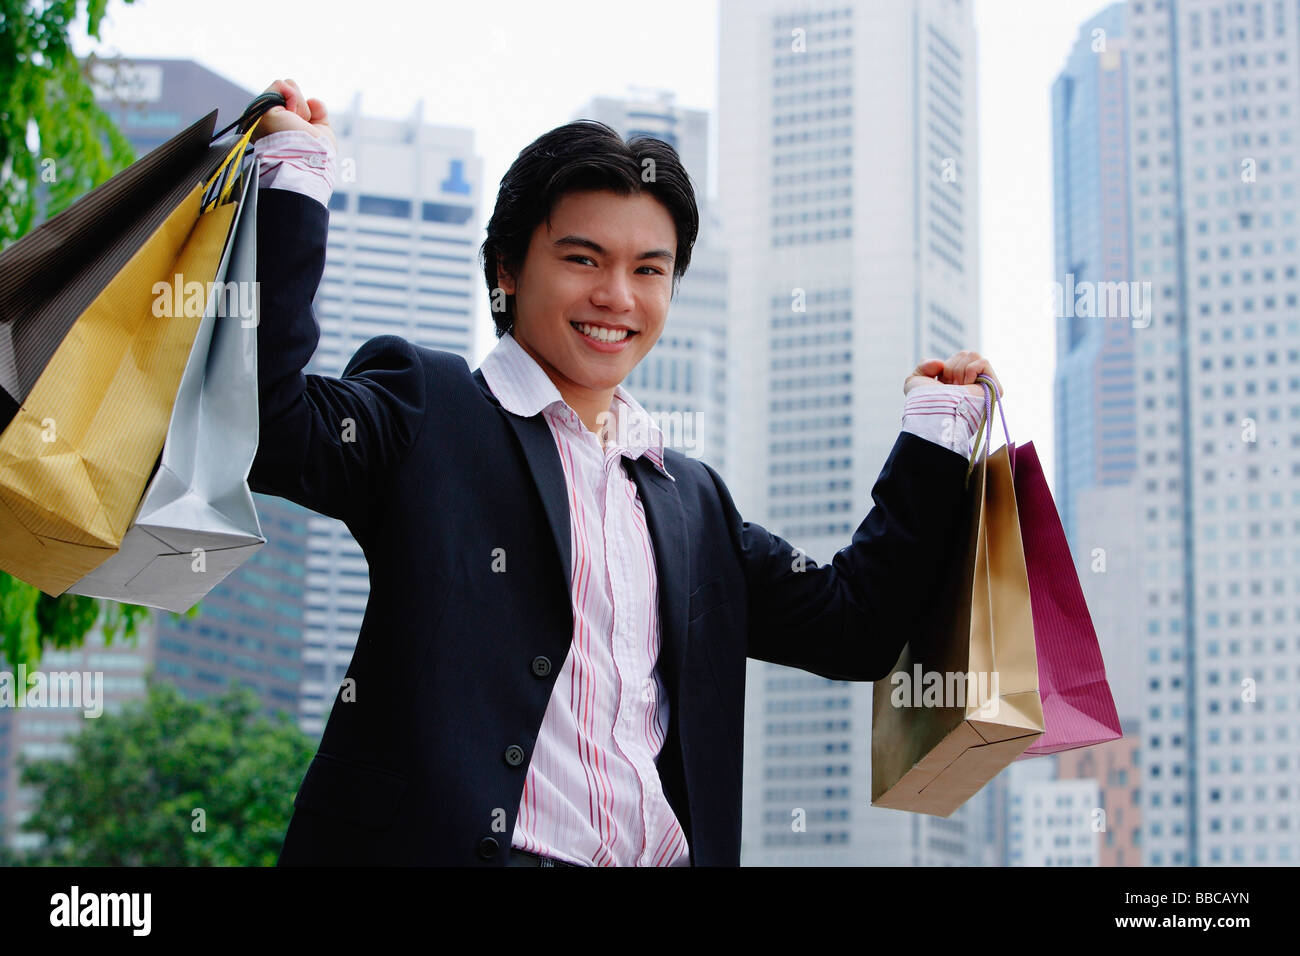 Man carrying shopping bags, smiling at camera Banque D'Images